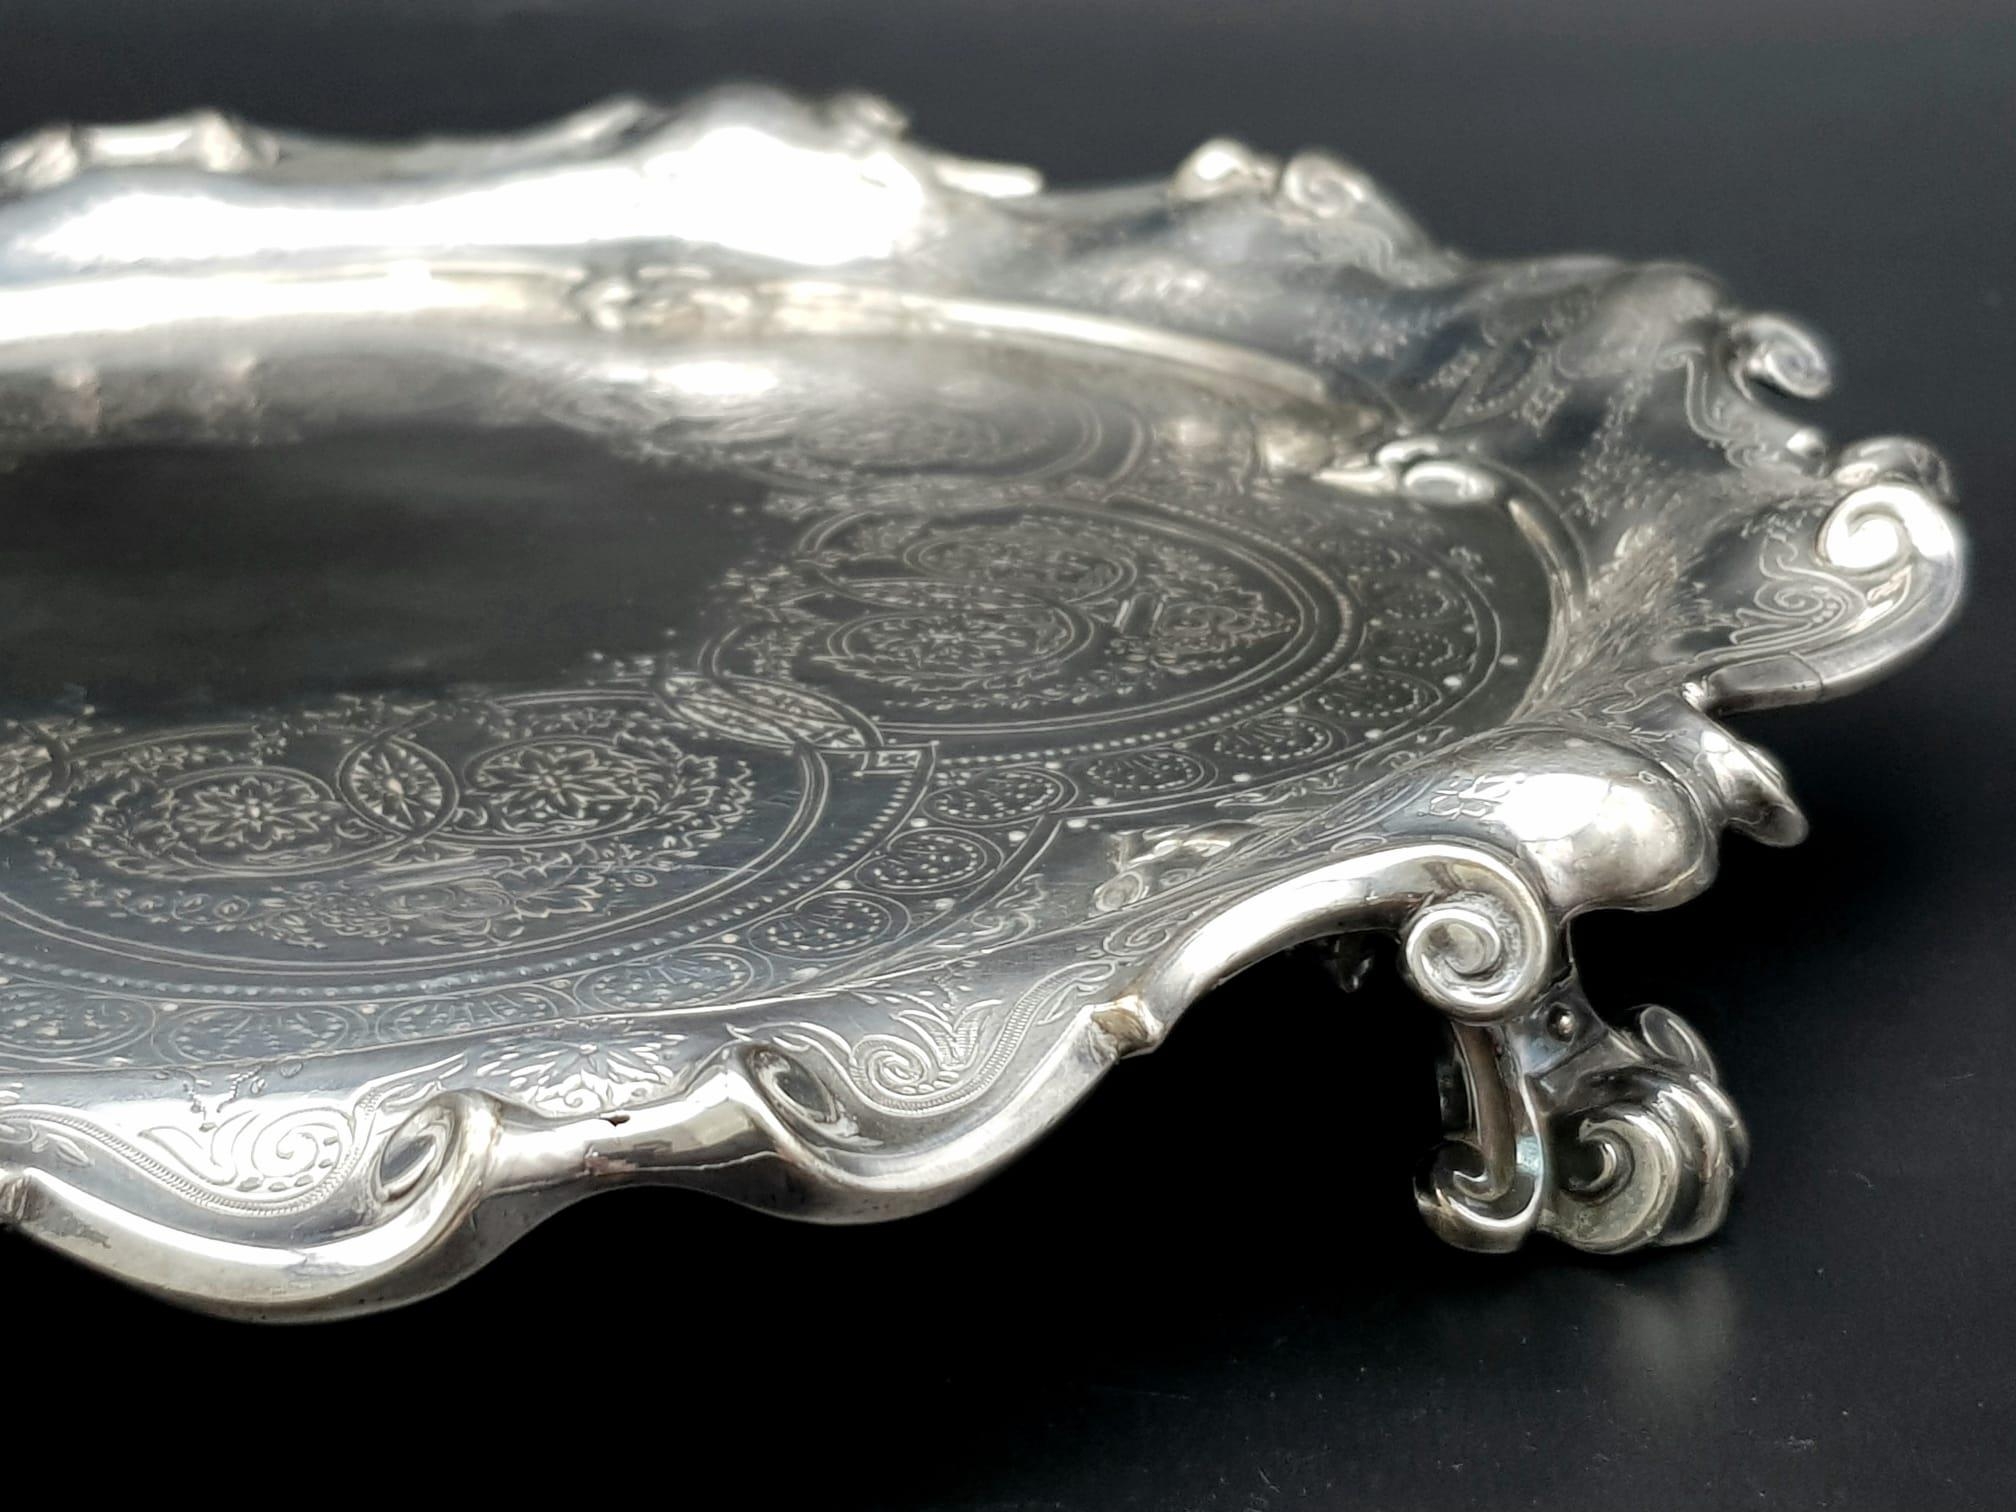 A 761gms solid silver Salva with scrolled edges and hand chased intricate decoration and - Image 4 of 6